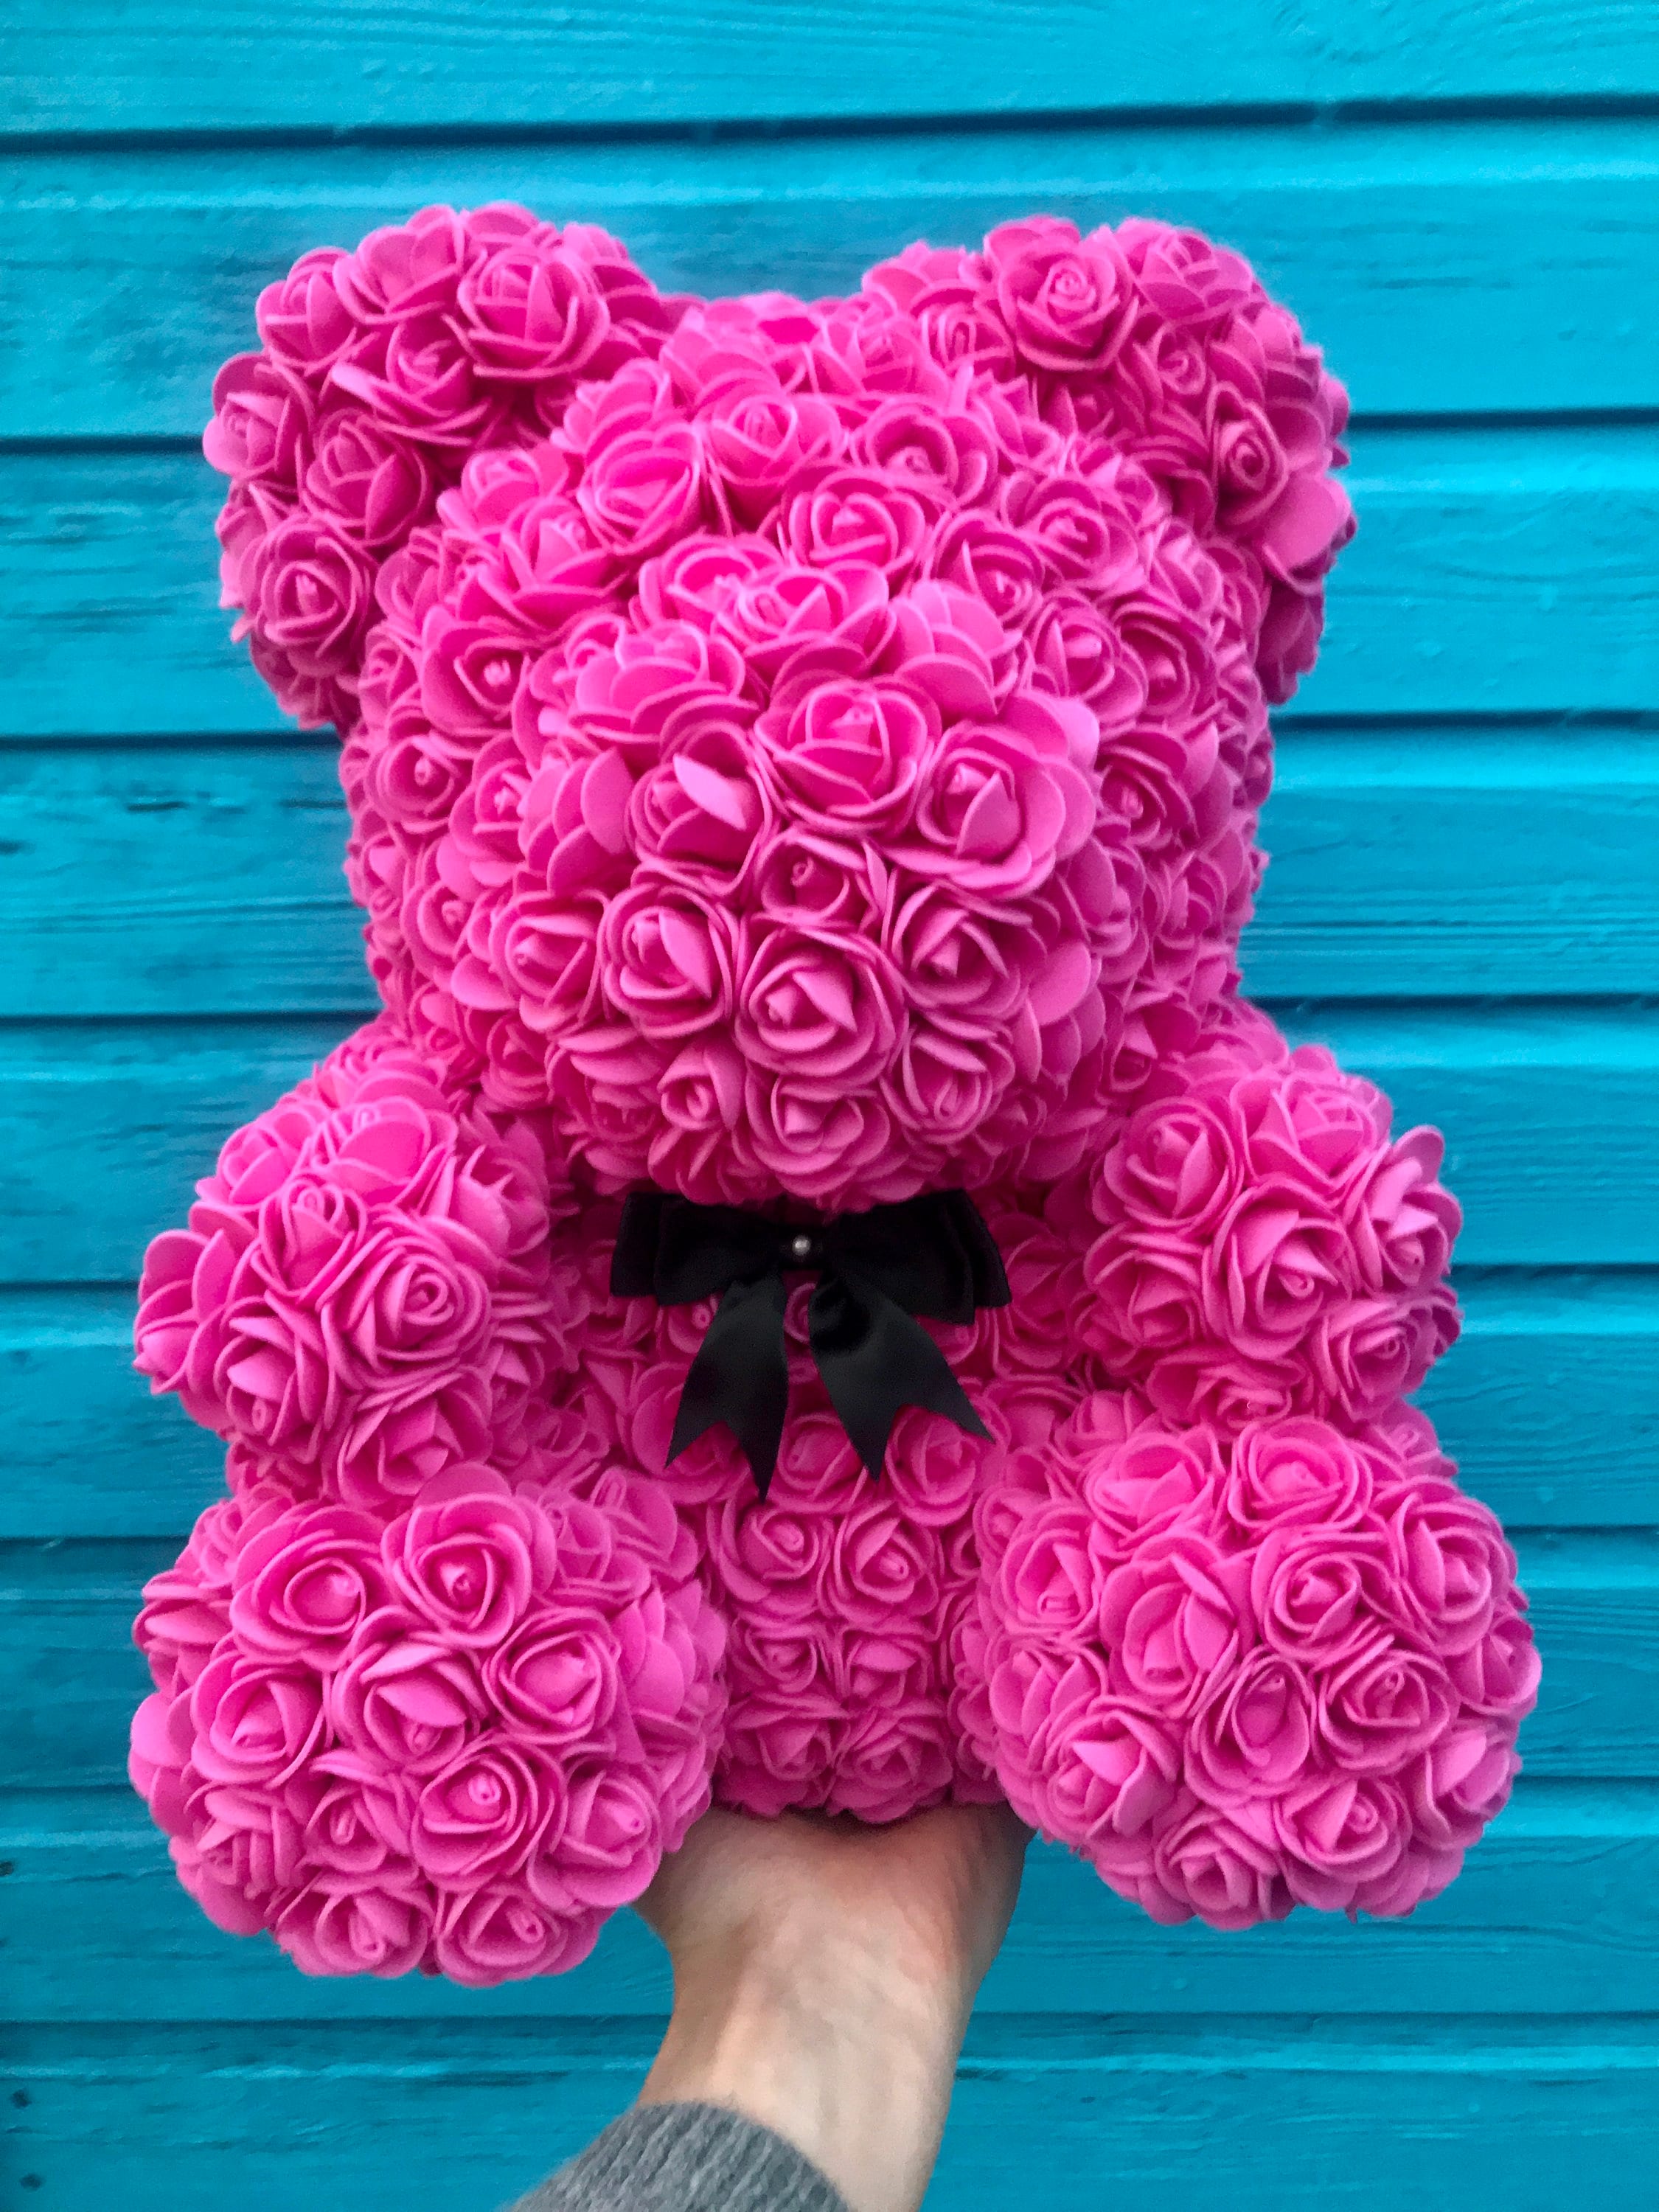 Valentines Day Gifts for Her Cute Preserved Real Red Rose Bear